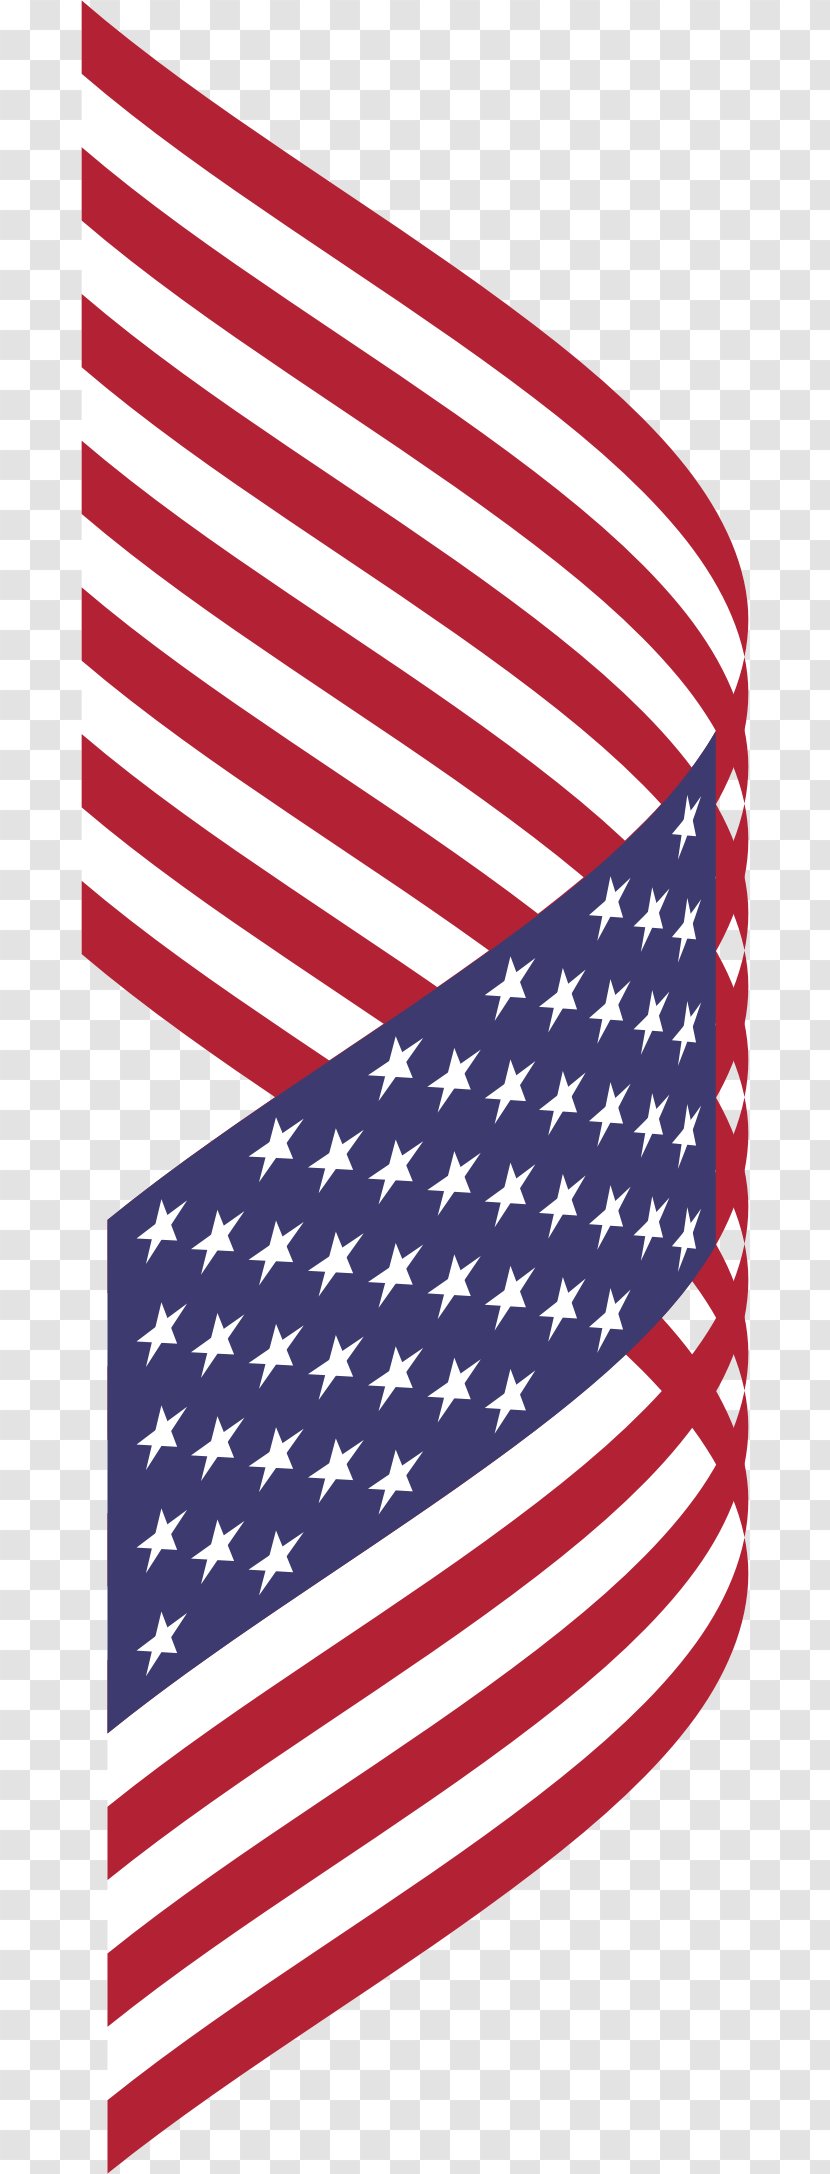 Flag Of The United States Clip Art - Breezy Cliparts Transparent PNG